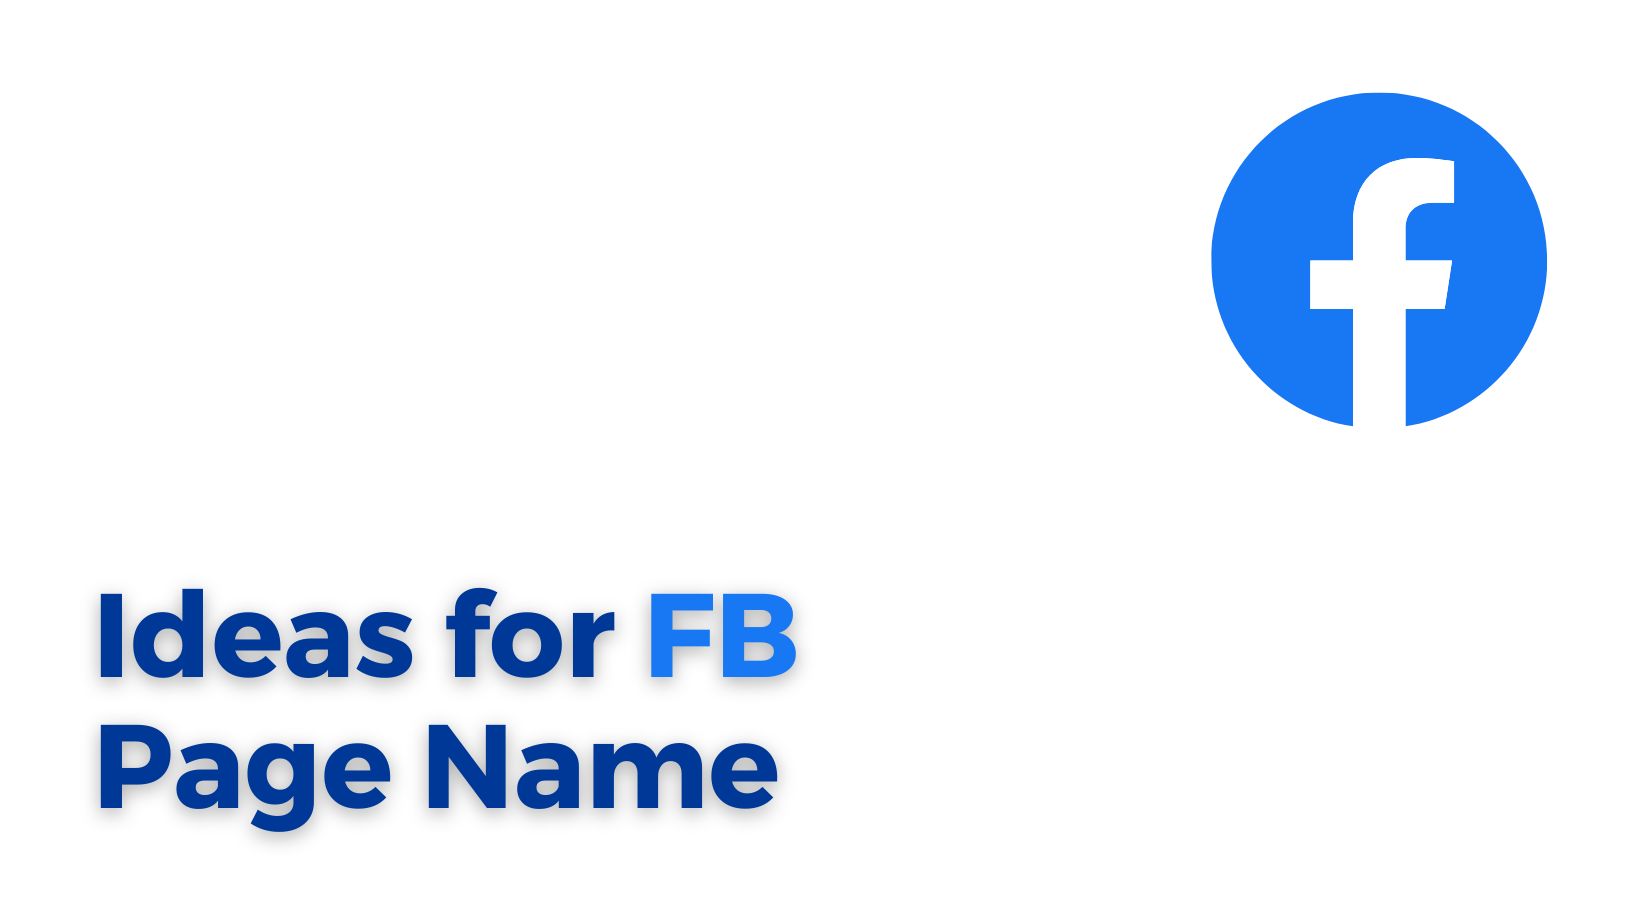 Ideas for FB Page Name